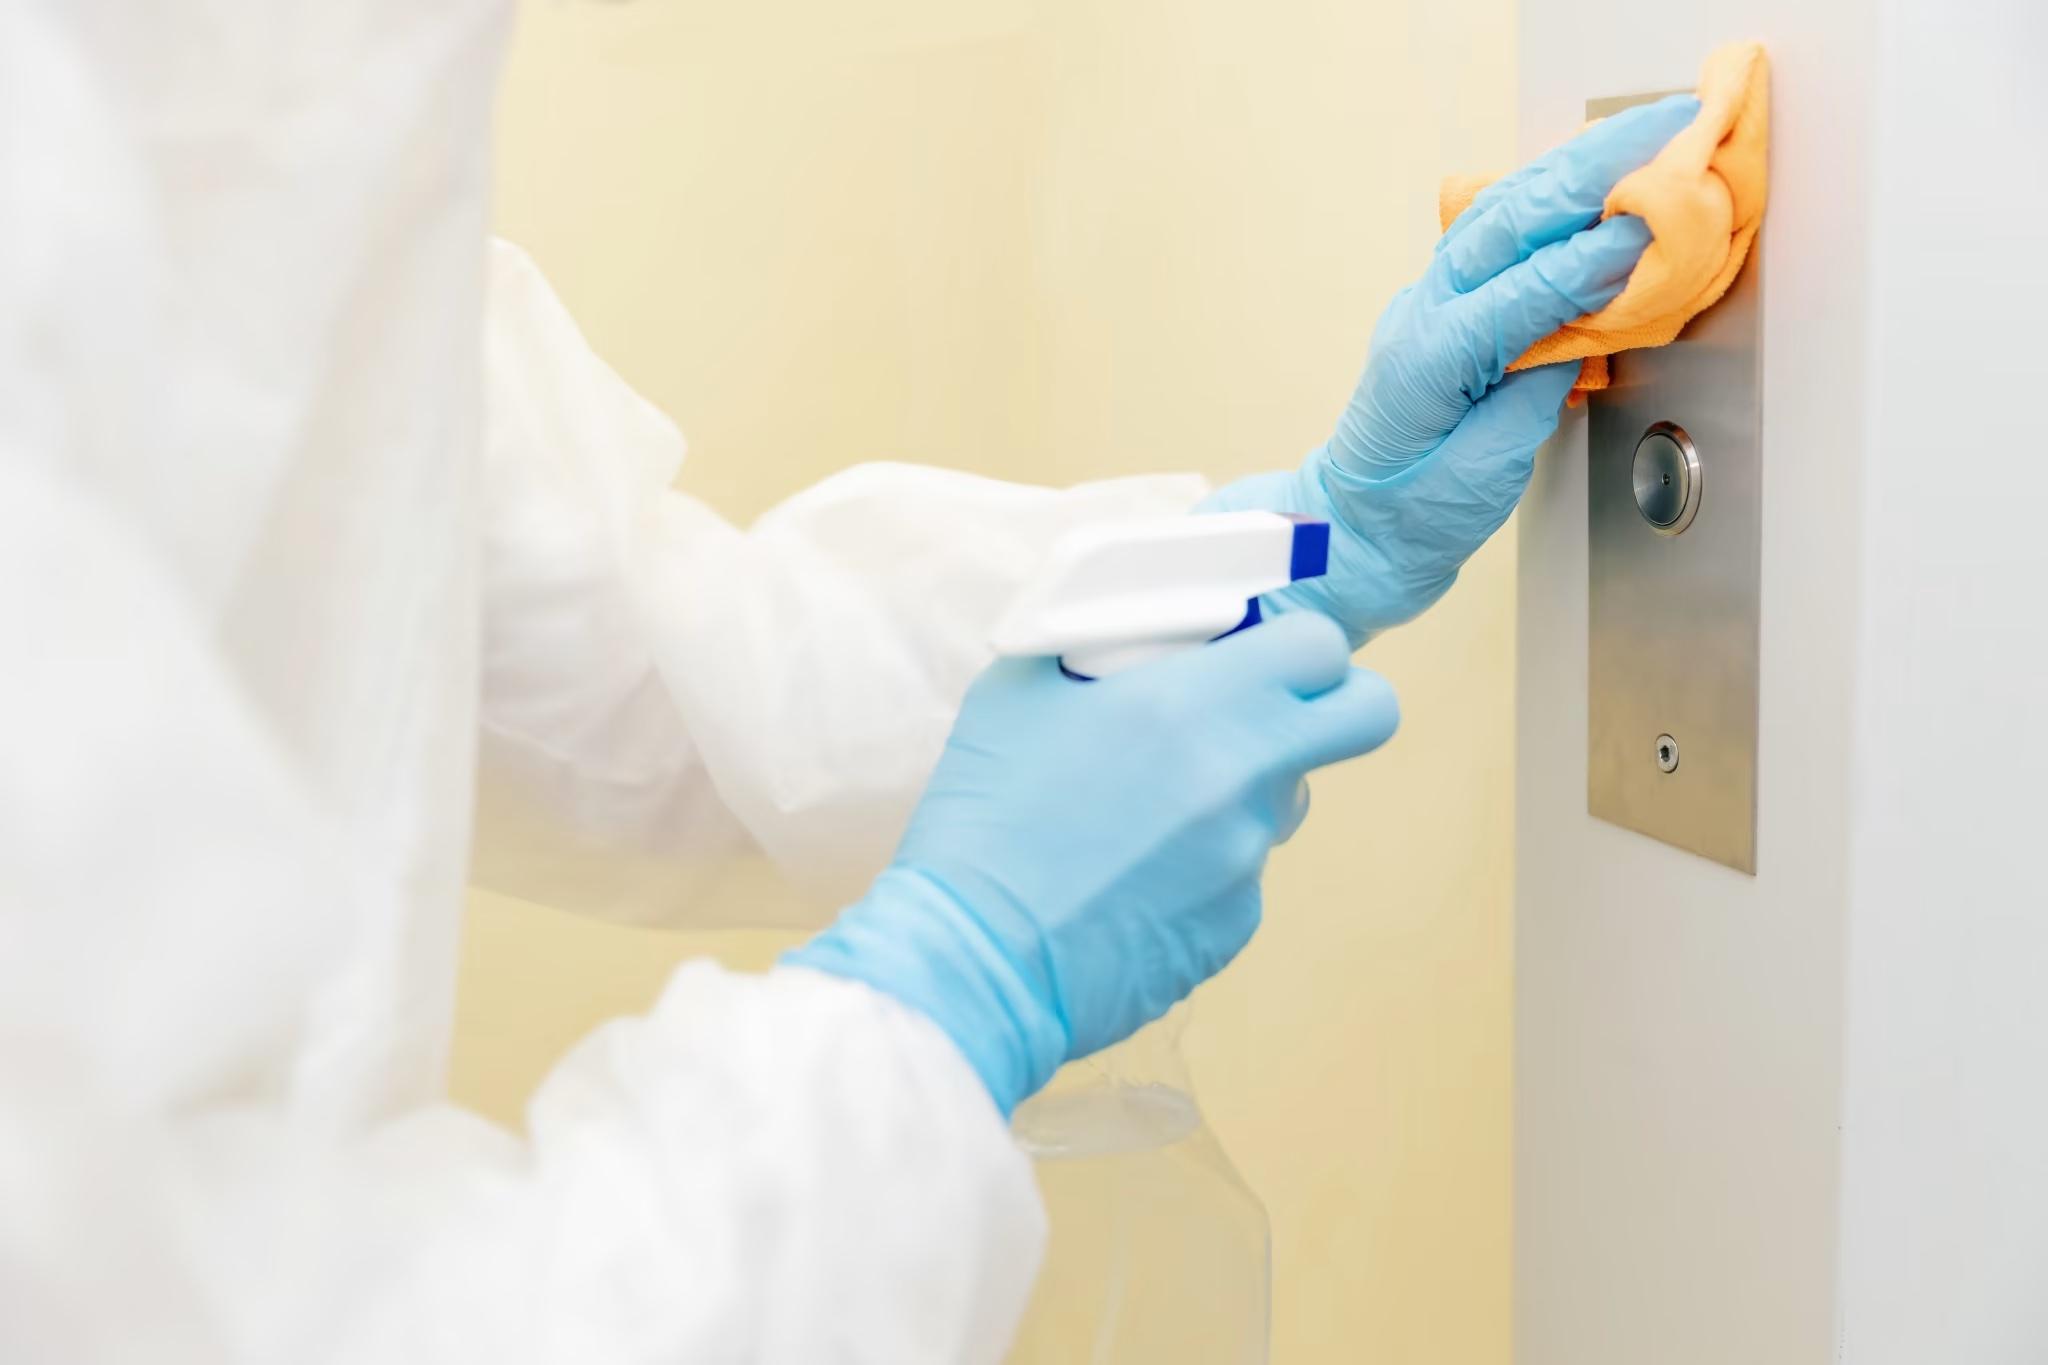 EVS staff cleaning elevator button in healthcare facility using disinfecting cloth